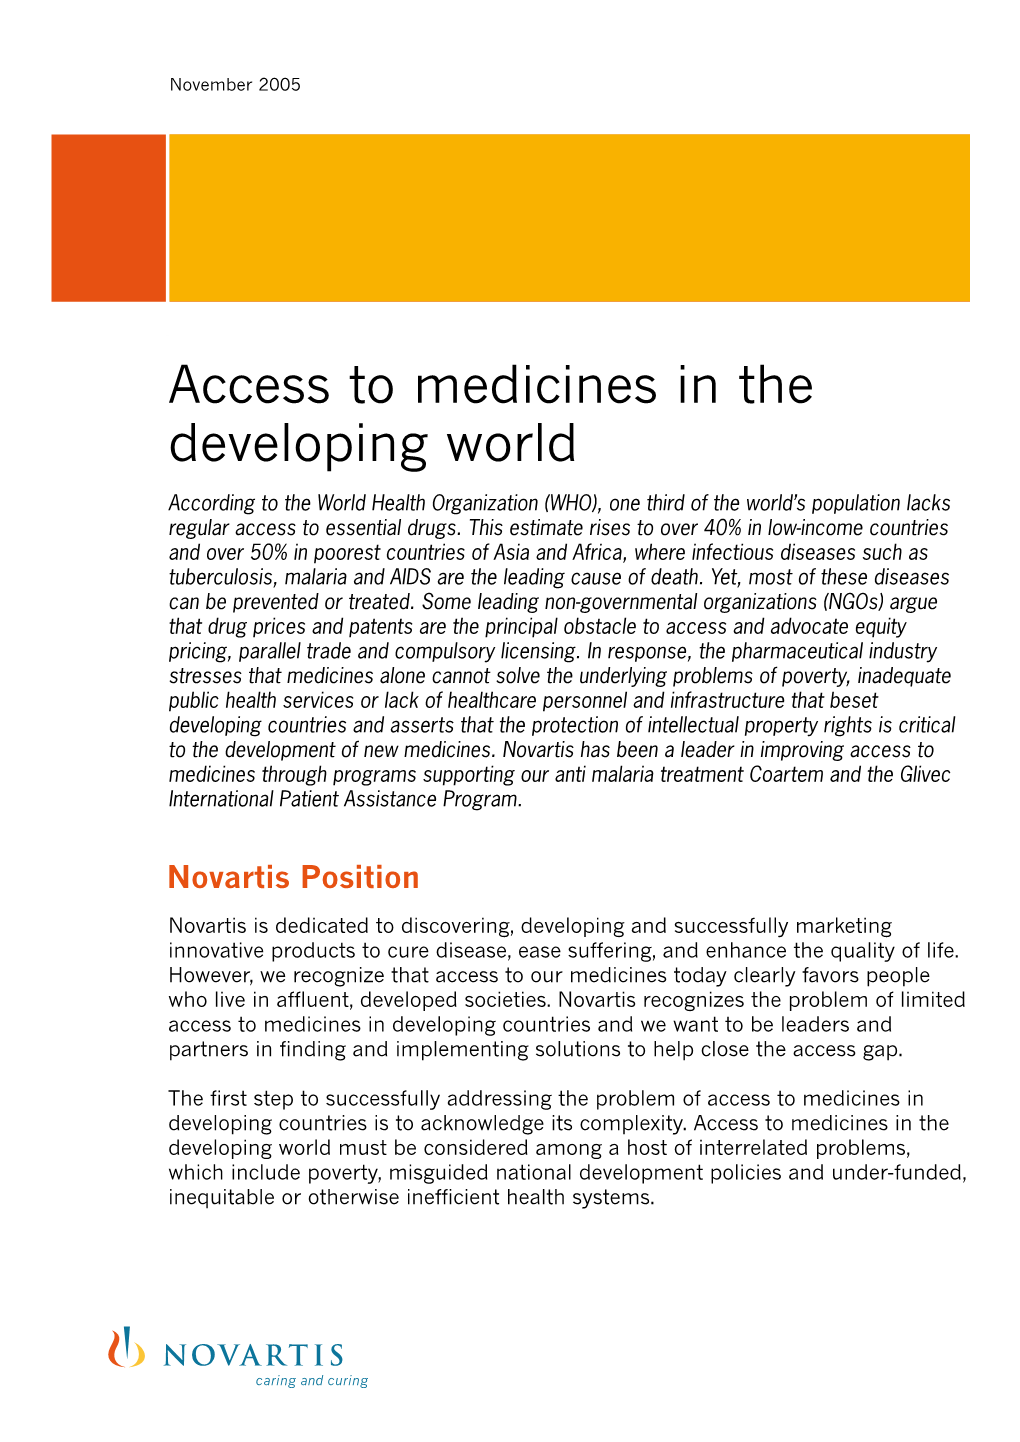 Access to Medicines in the Developing World